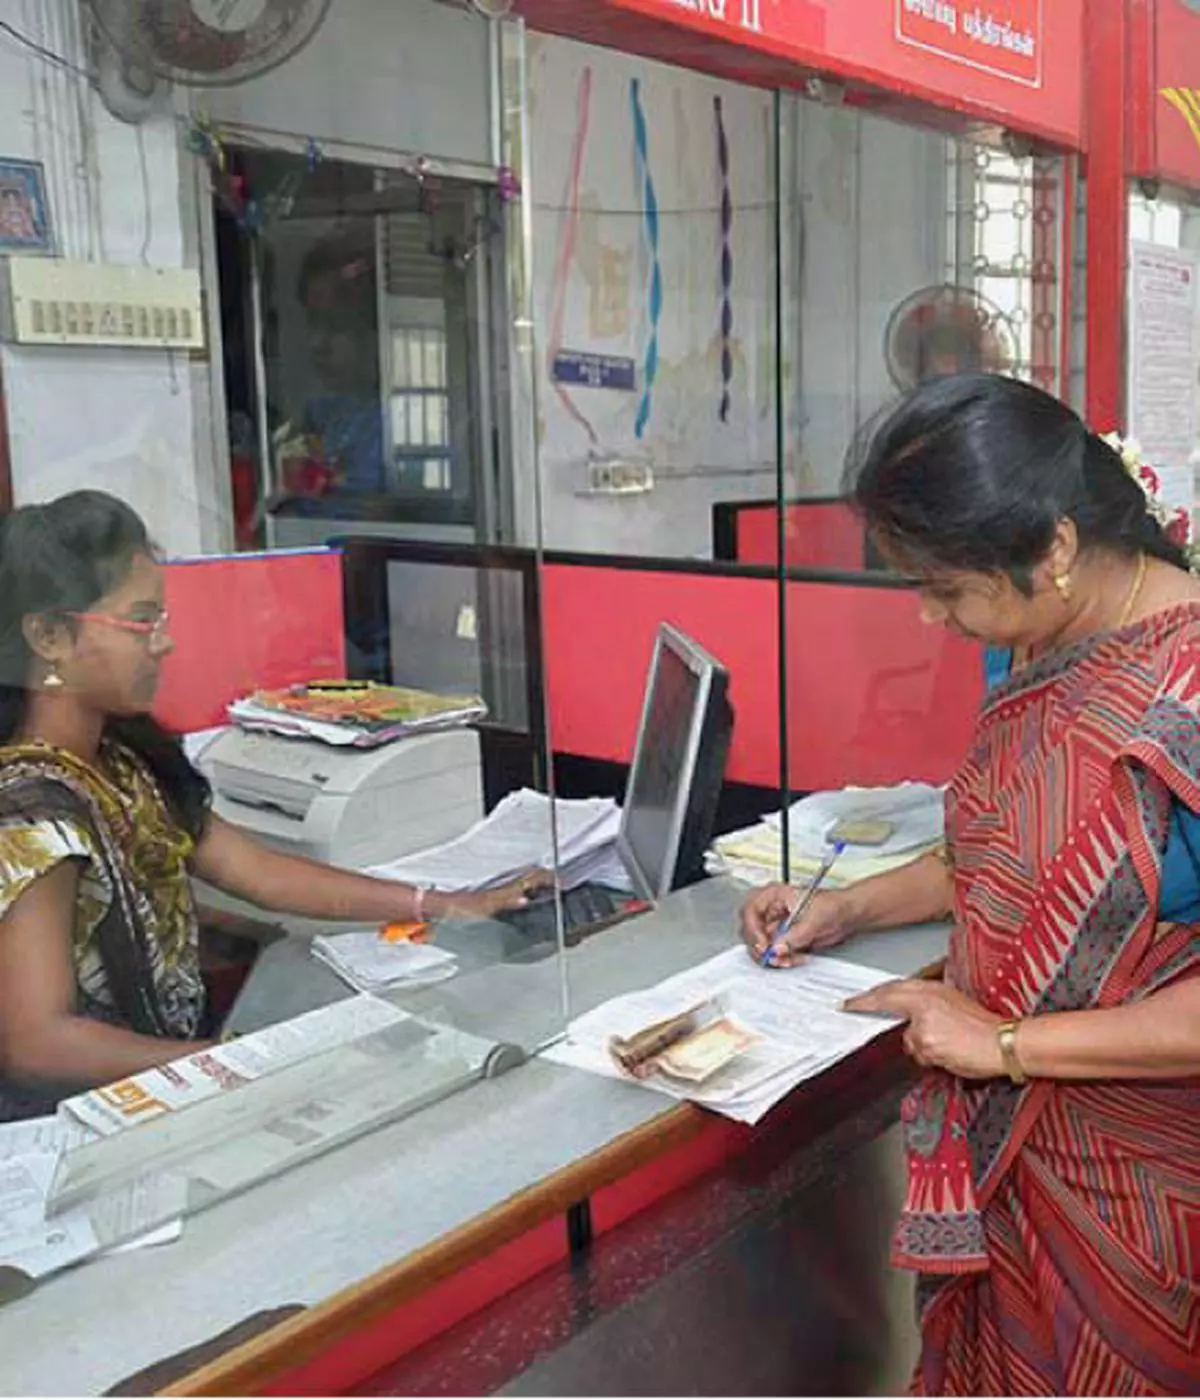 A fixed interest rate of 7.5 per cent on deposit up to ₹Rs 2 lakh per person for two years under the Mahila Samman Savings Certificate scheme can be made in the name of a woman or a girl child and it will have a partial withdrawal facility as well.